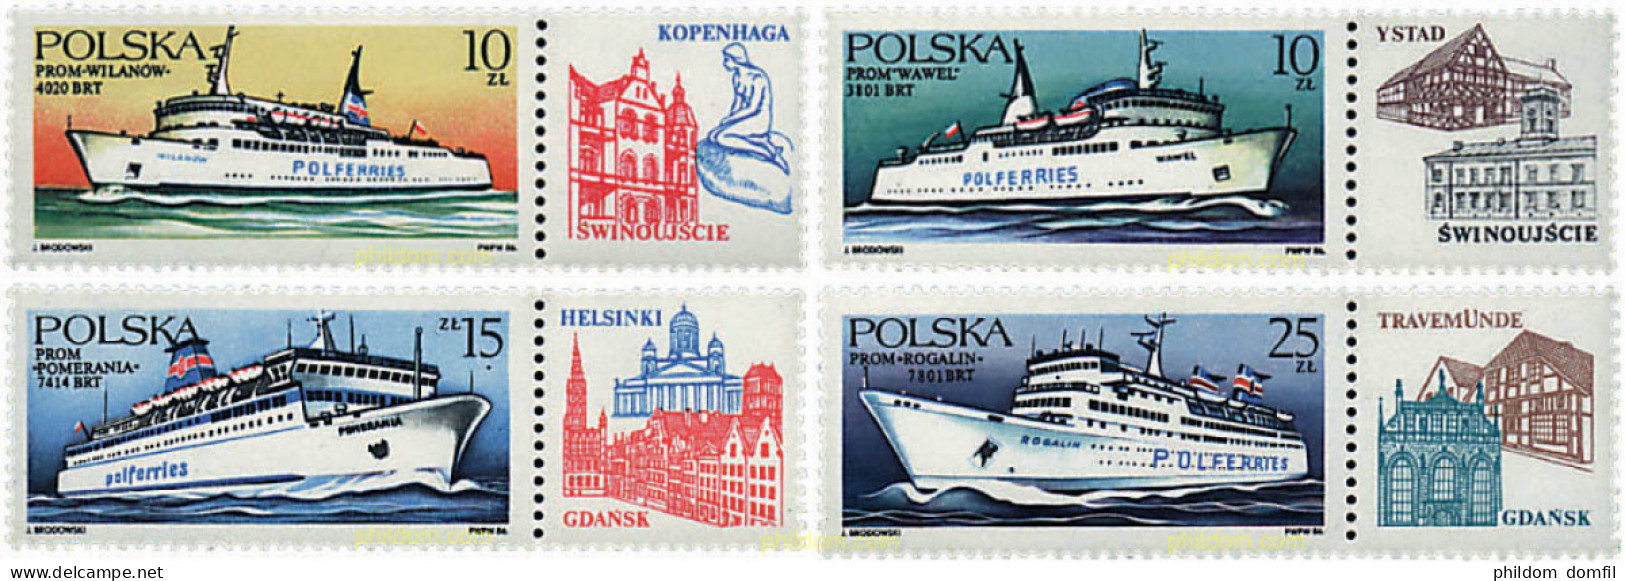 57131 MNH POLONIA 1986 TRANSPORTES MARITIMOS - Unclassified